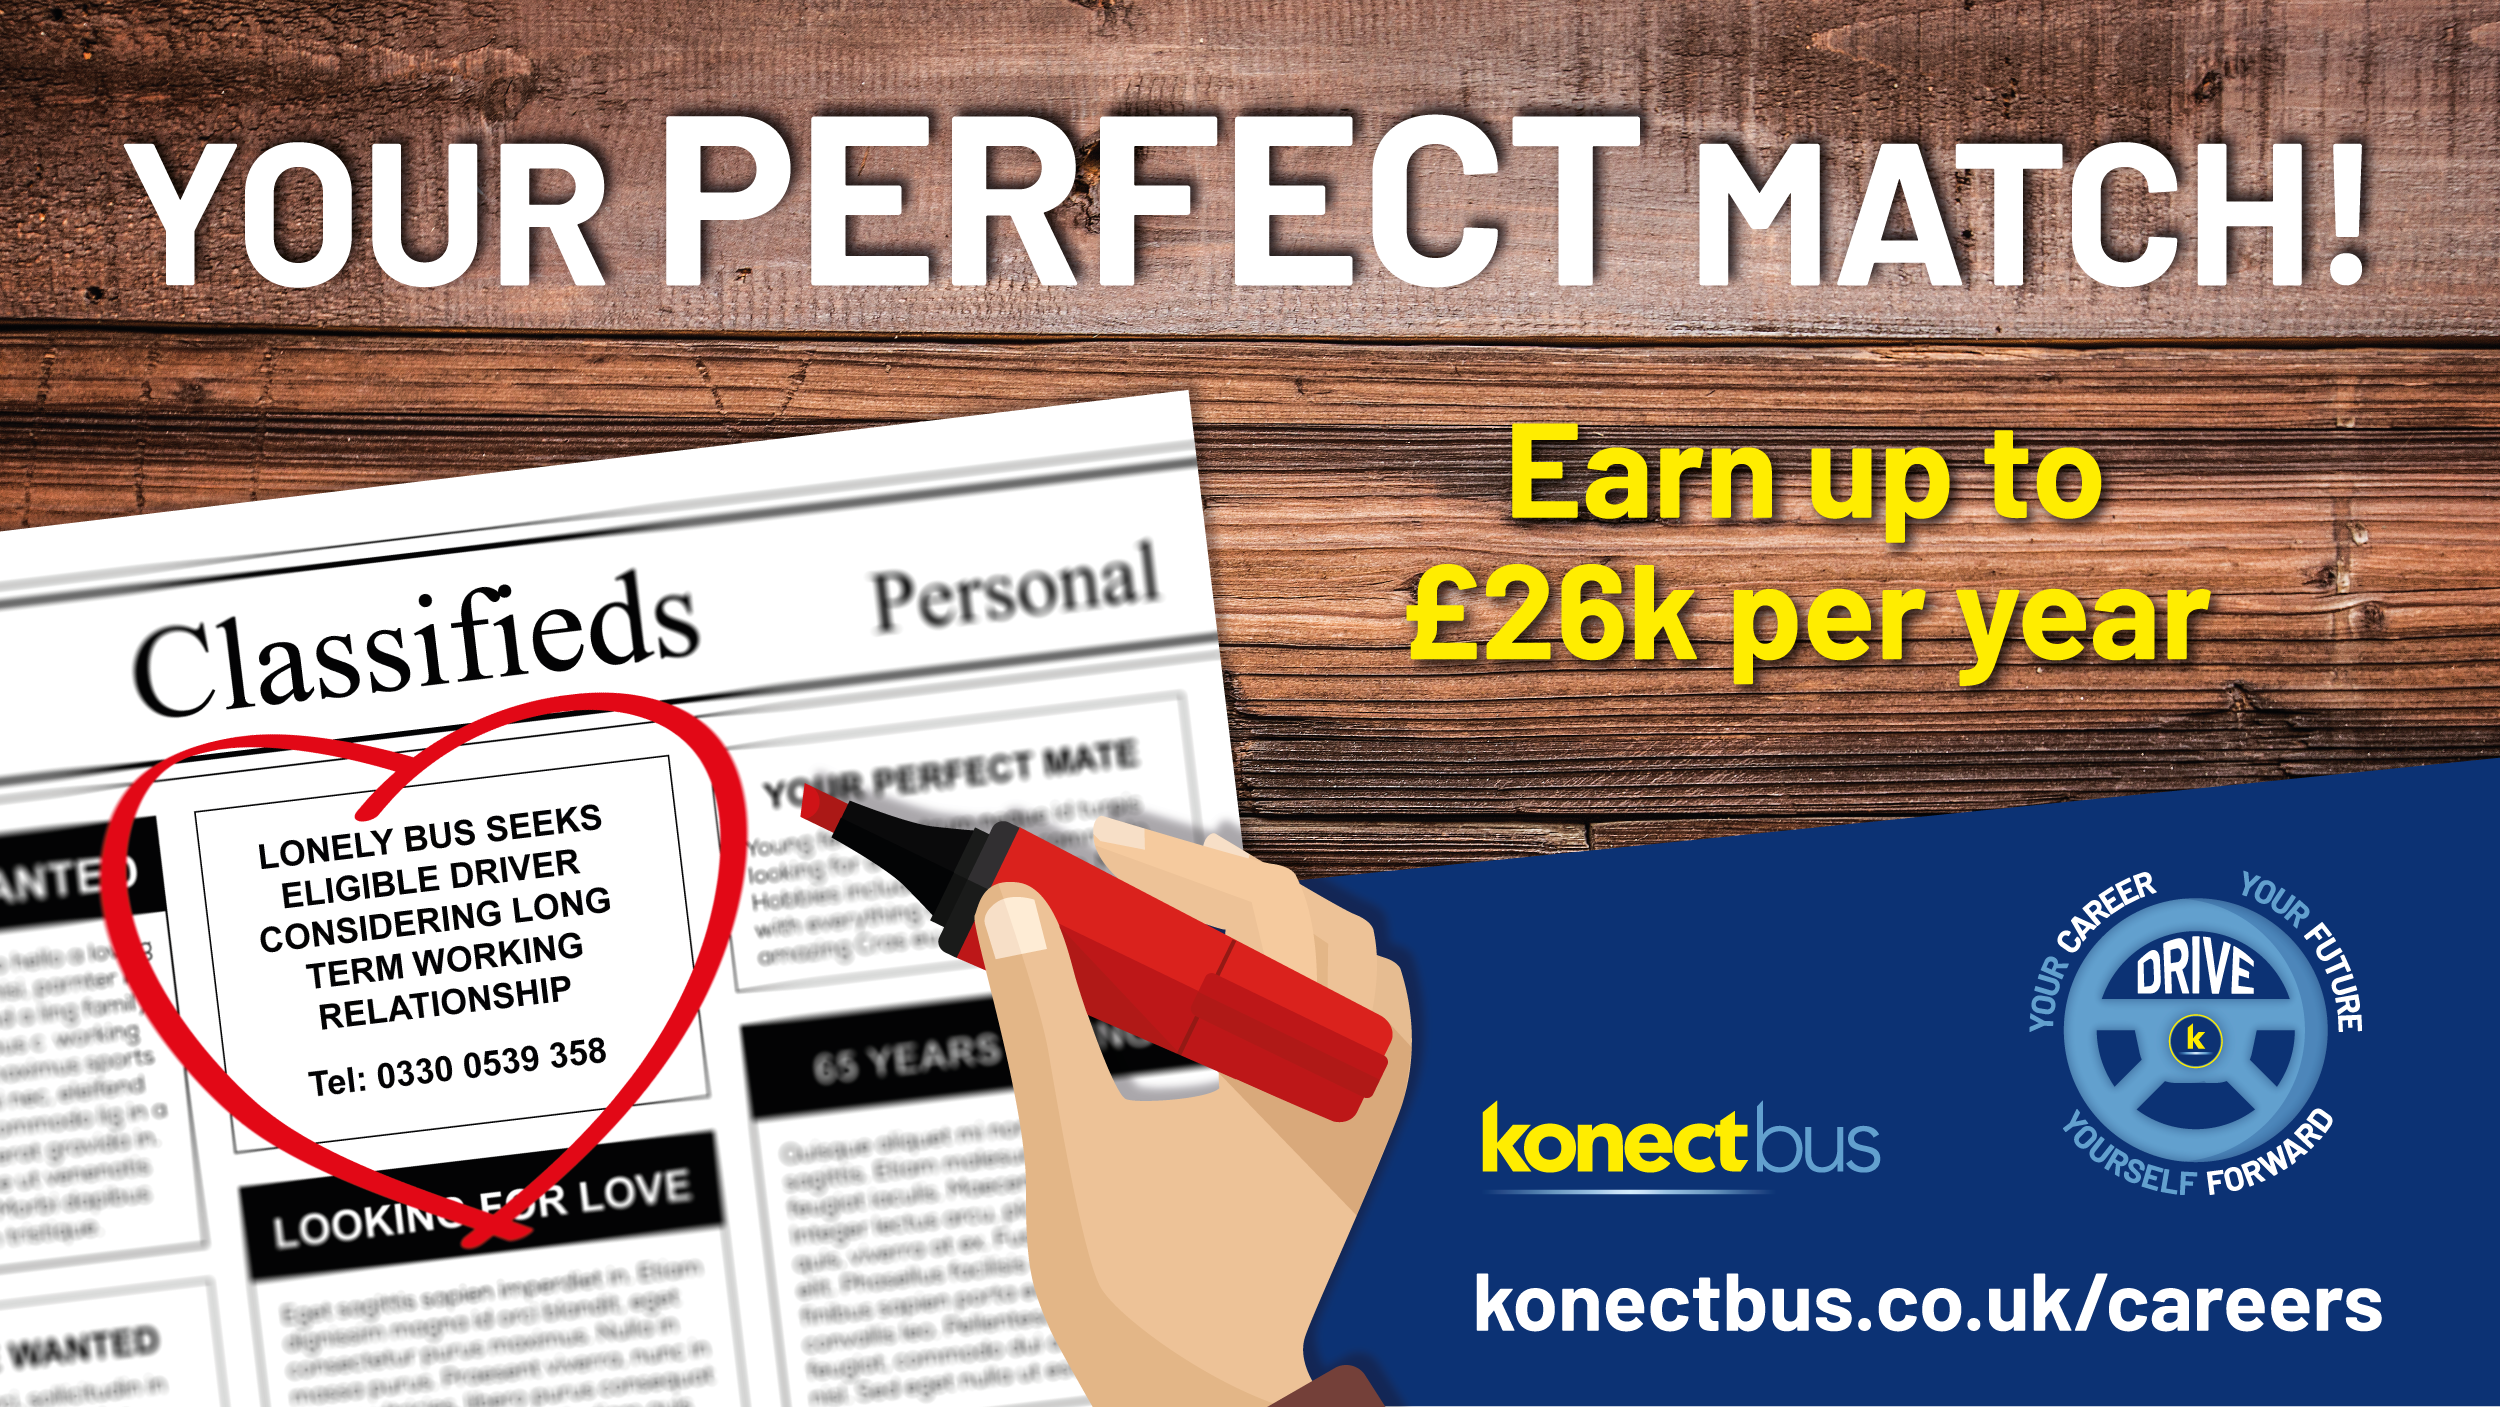 Image of Your perfect match advert